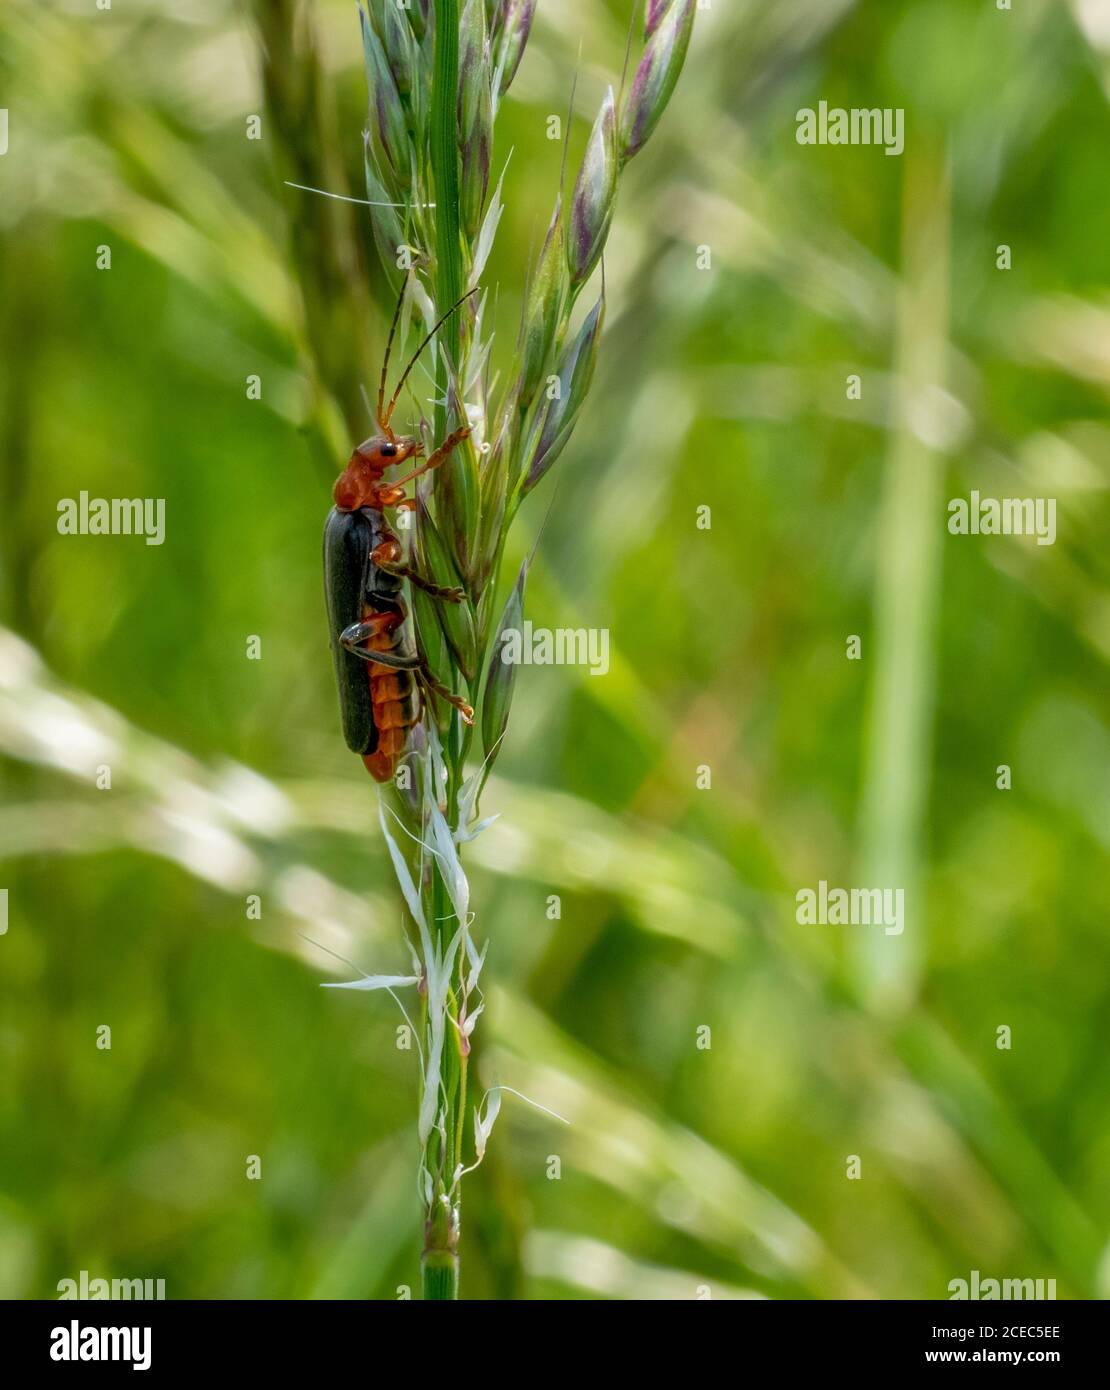 a Soldier beetle on grass stipe in natural back Stock Photo